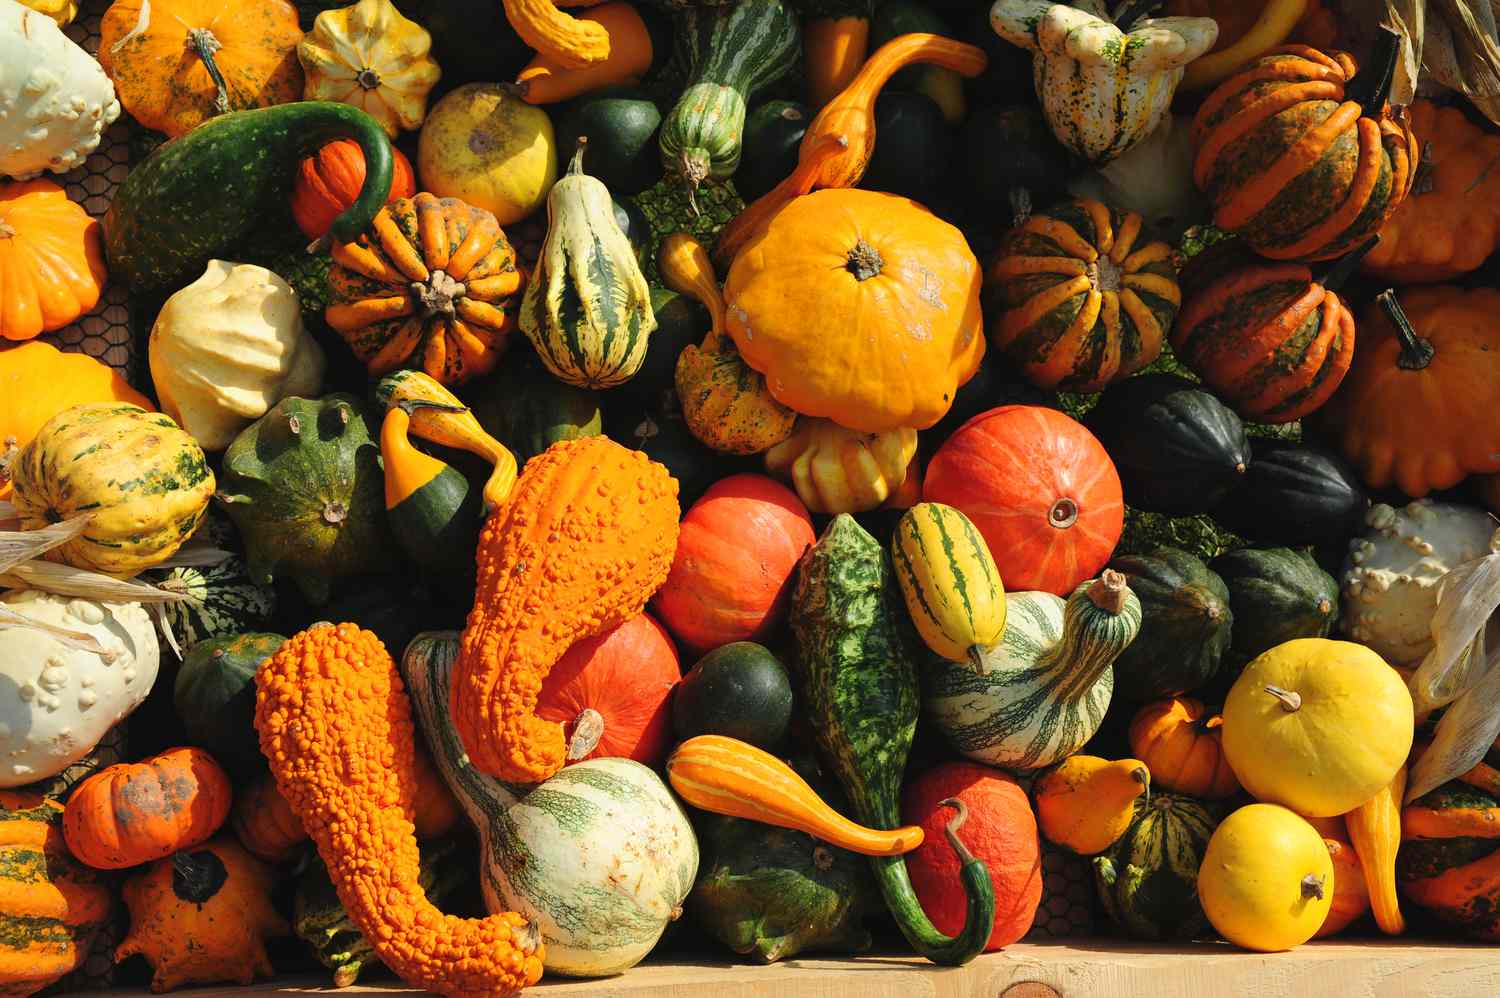 Ornamental gourds piled on each other in sunlight